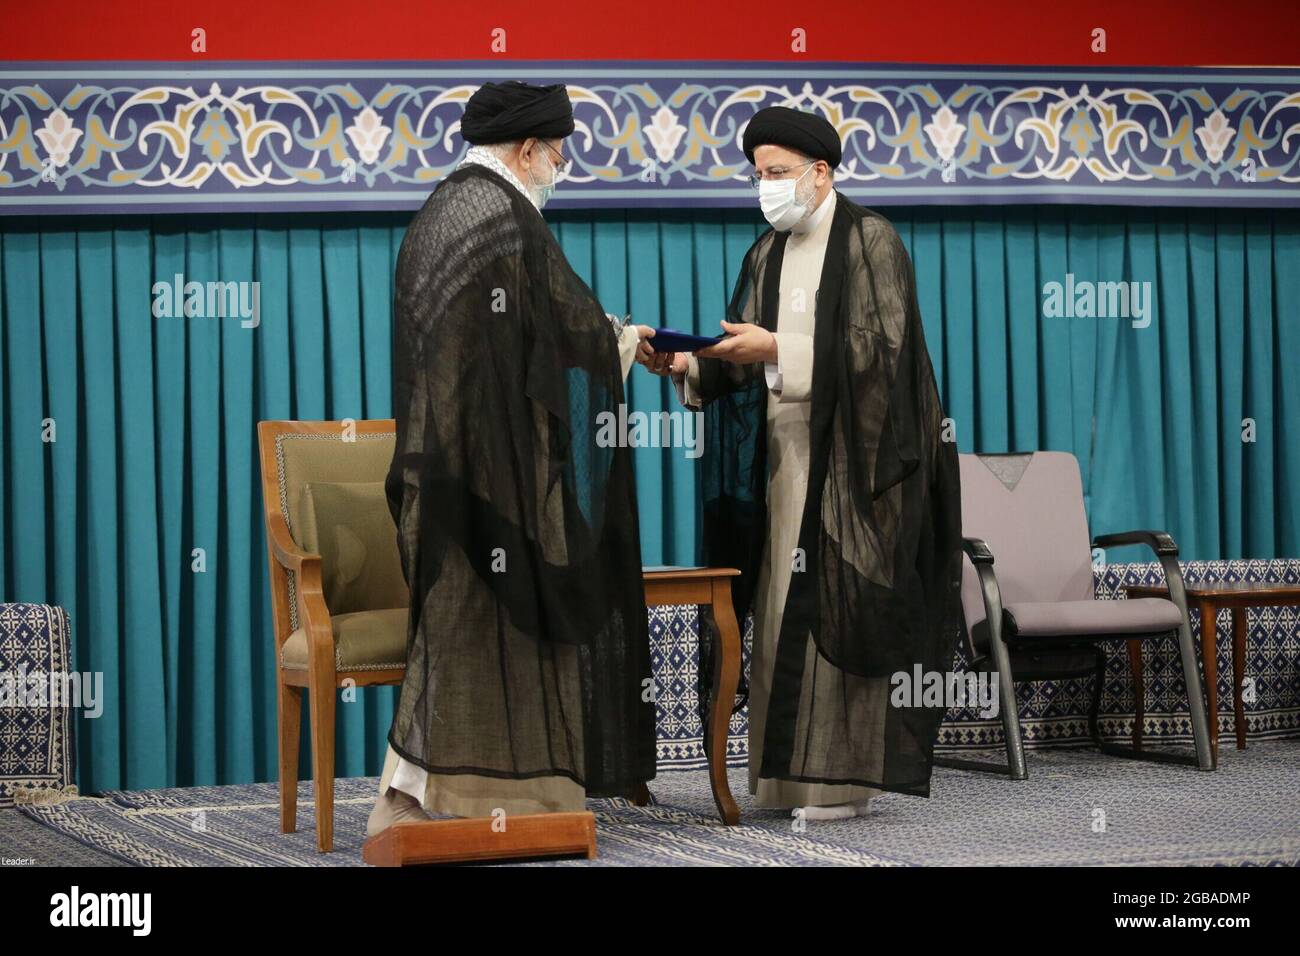 Tehran, Tehran, Iran. 3rd Aug, 2021. A handout picture made available by Iran's Supreme Leader Office shows Iranian supreme leader Ayatollah ALI KHAMENEI (L) handing over the presidential precept to new Iranian president EBRAHIM RAISI (R), in Tehran, Iran, 03 August 2021. Iranian presidents are first approved by the supreme leader, who according to the constitution is the actual head of state, and then take the oath before parliament. Ebrahim Raisi has been inaugurated as the new president of the Islamic Republic of Iran on 03 August 2021, as the country is facing an economic crisis along wit Stock Photo